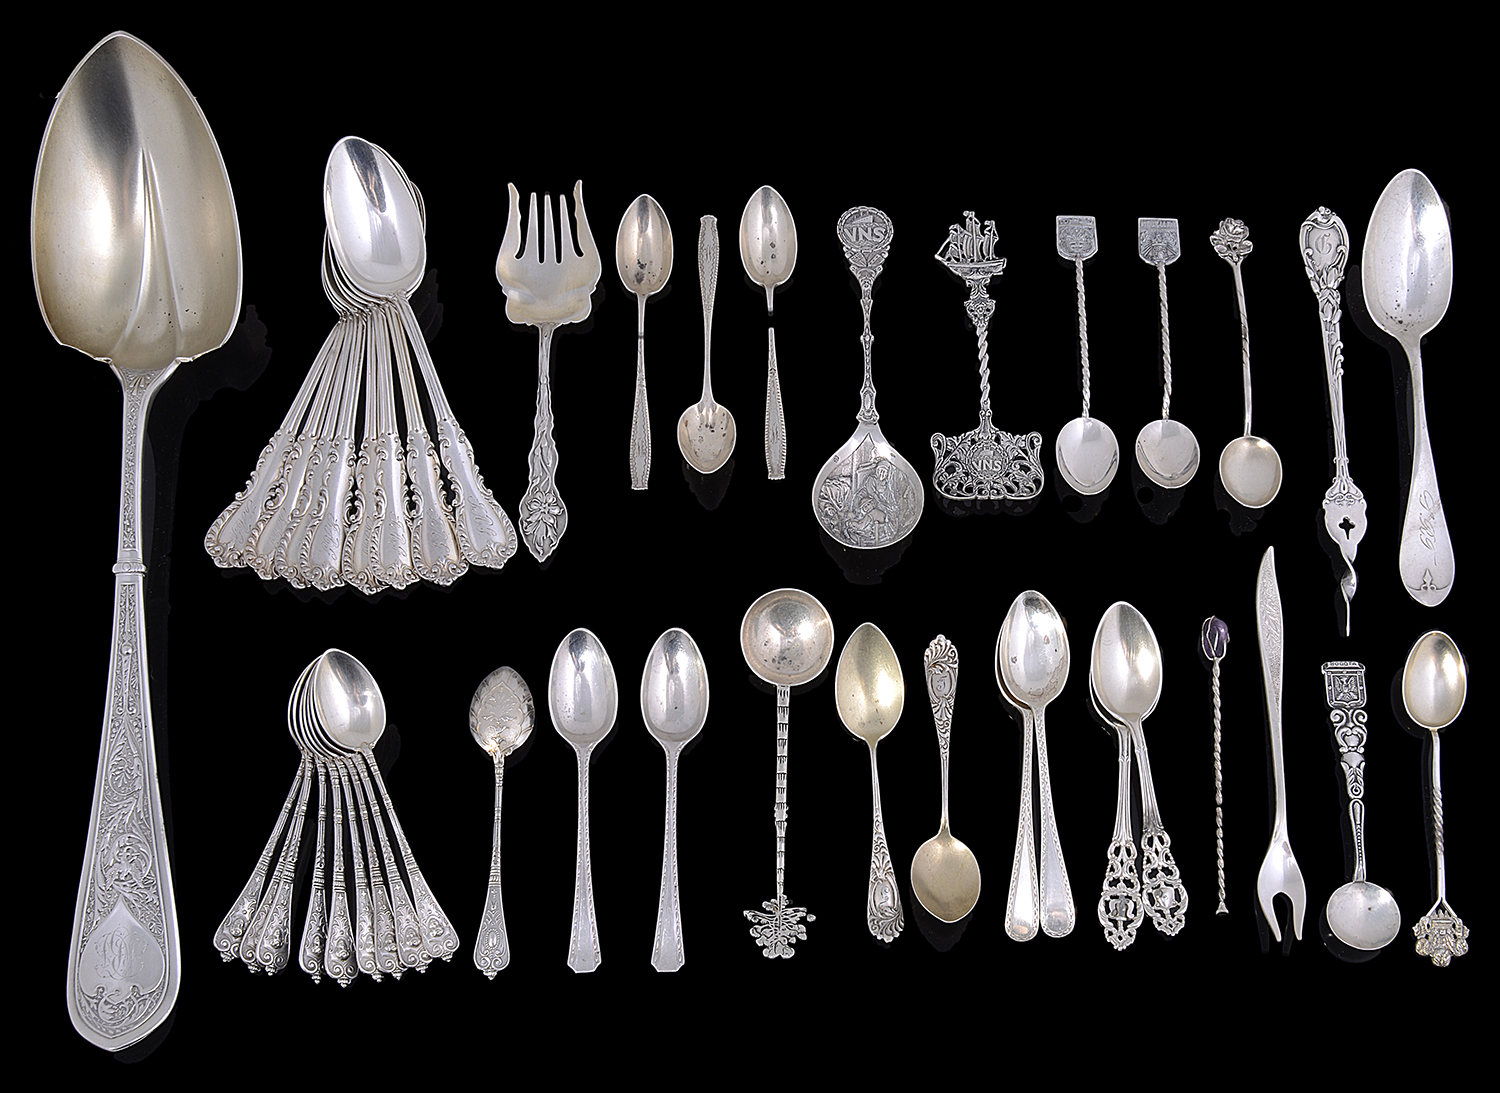 A selection of mostly early 20th century American sterling silver spoons